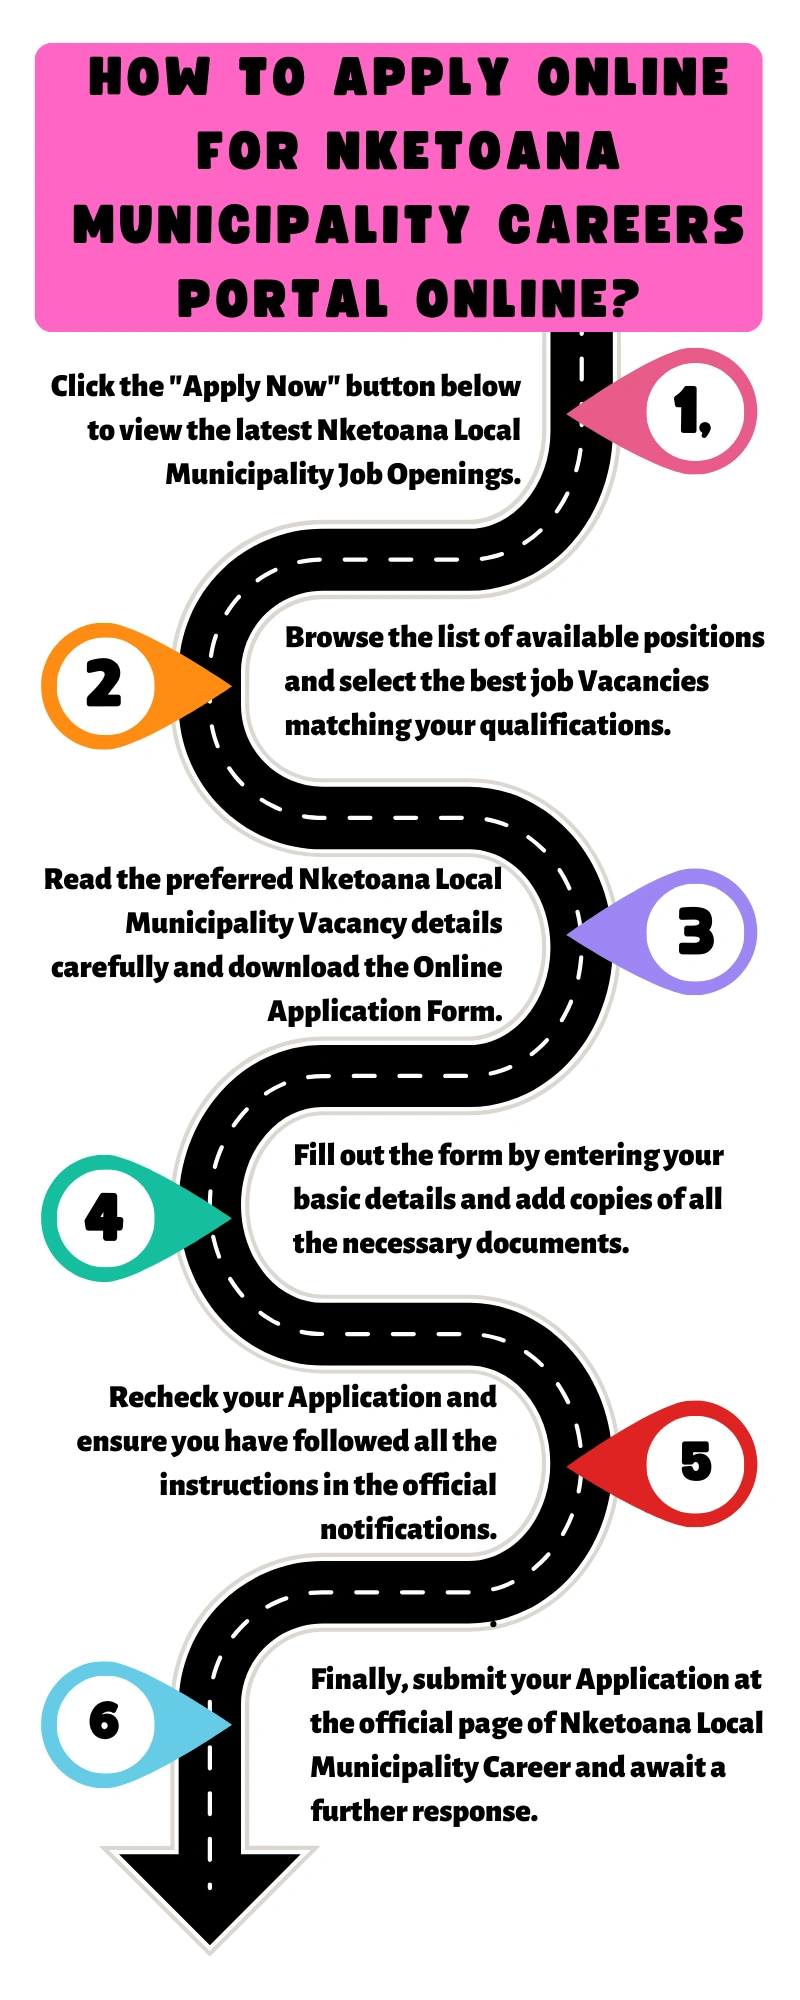 How to Apply online for Nketoana Municipality Careers Portal Online?